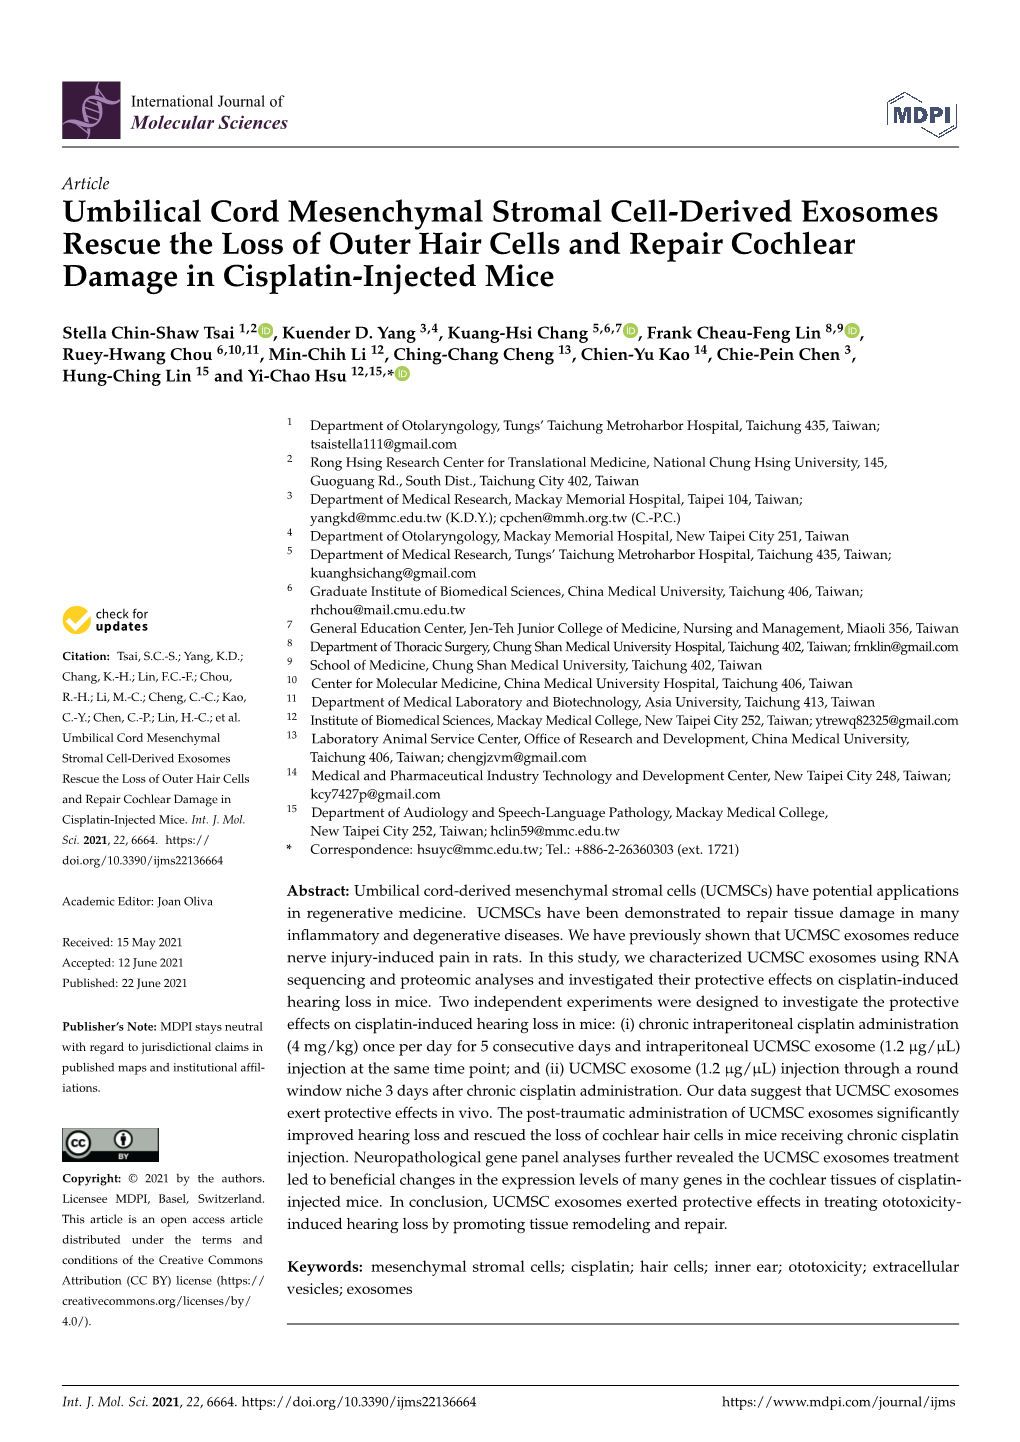 Umbilical Cord Mesenchymal Stromal Cell-Derived Exosomes Rescue the Loss of Outer Hair Cells and Repair Cochlear Damage in Cisplatin-Injected Mice